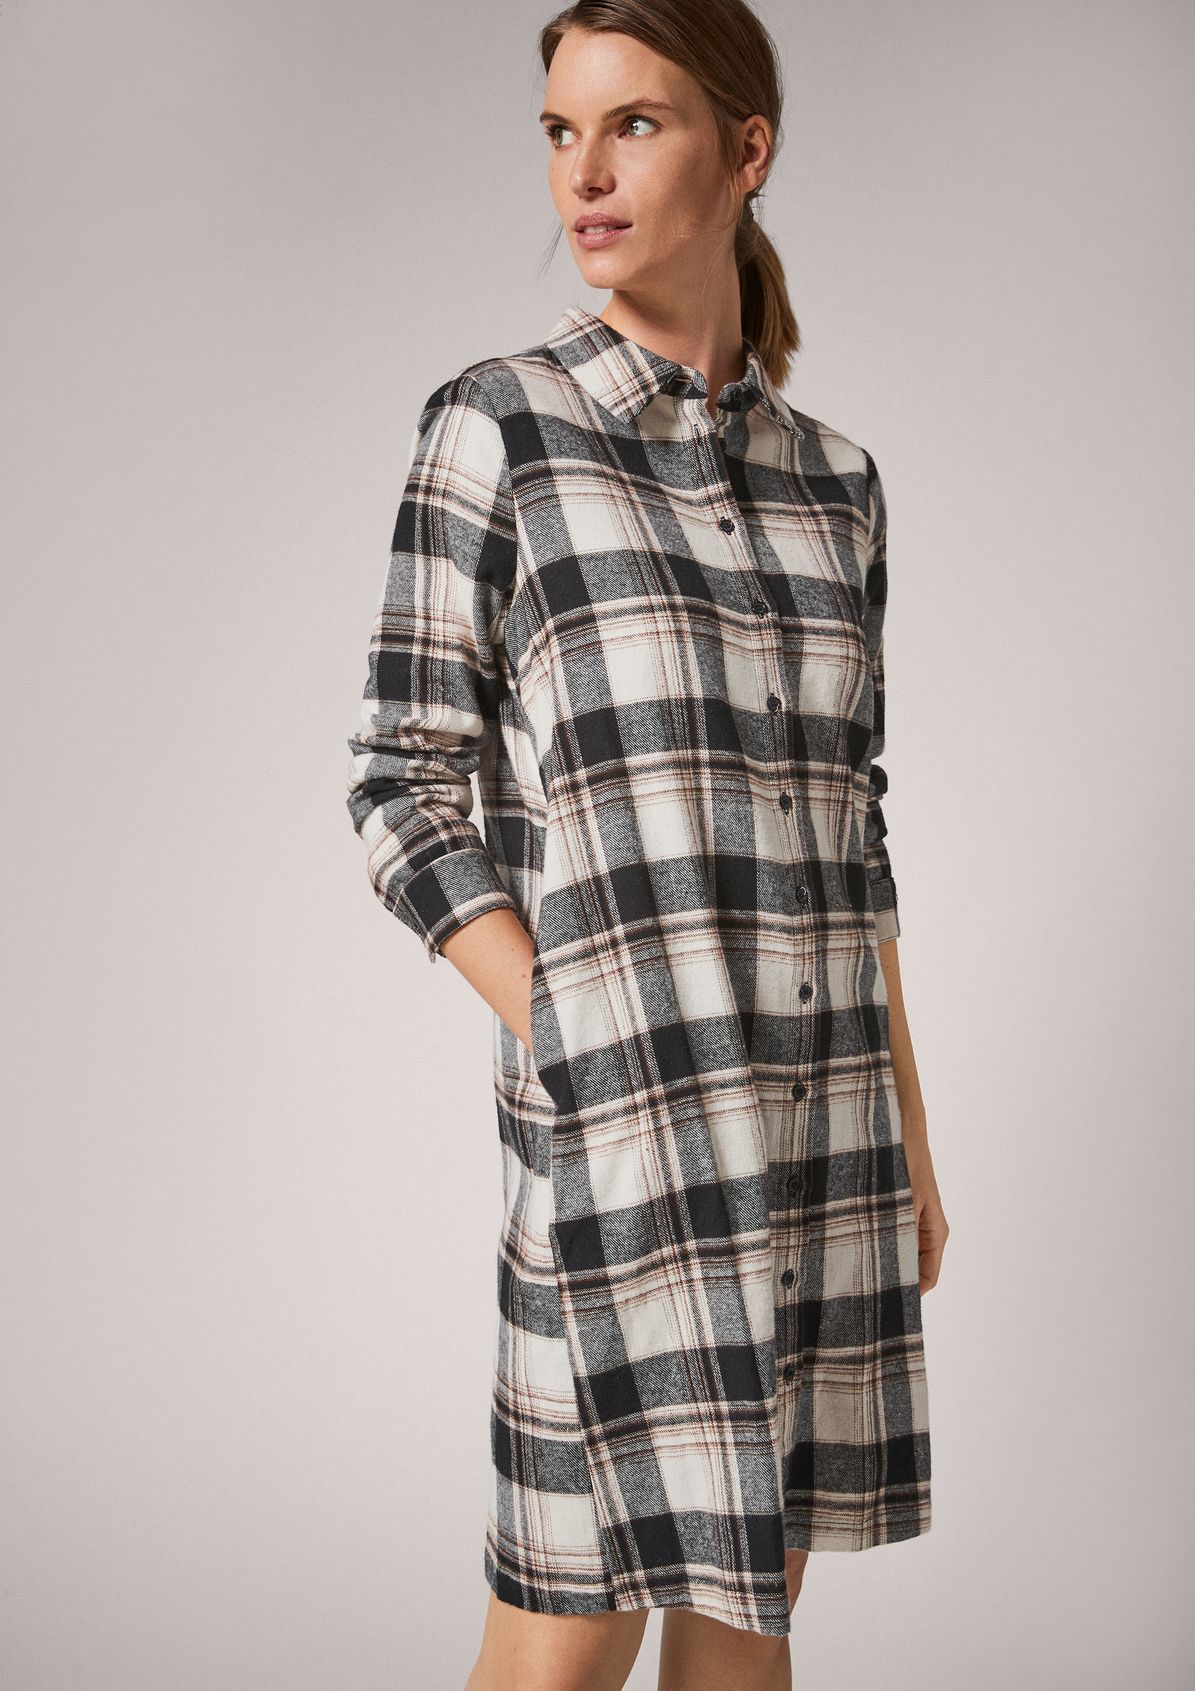 Flannel shirt dress from comma